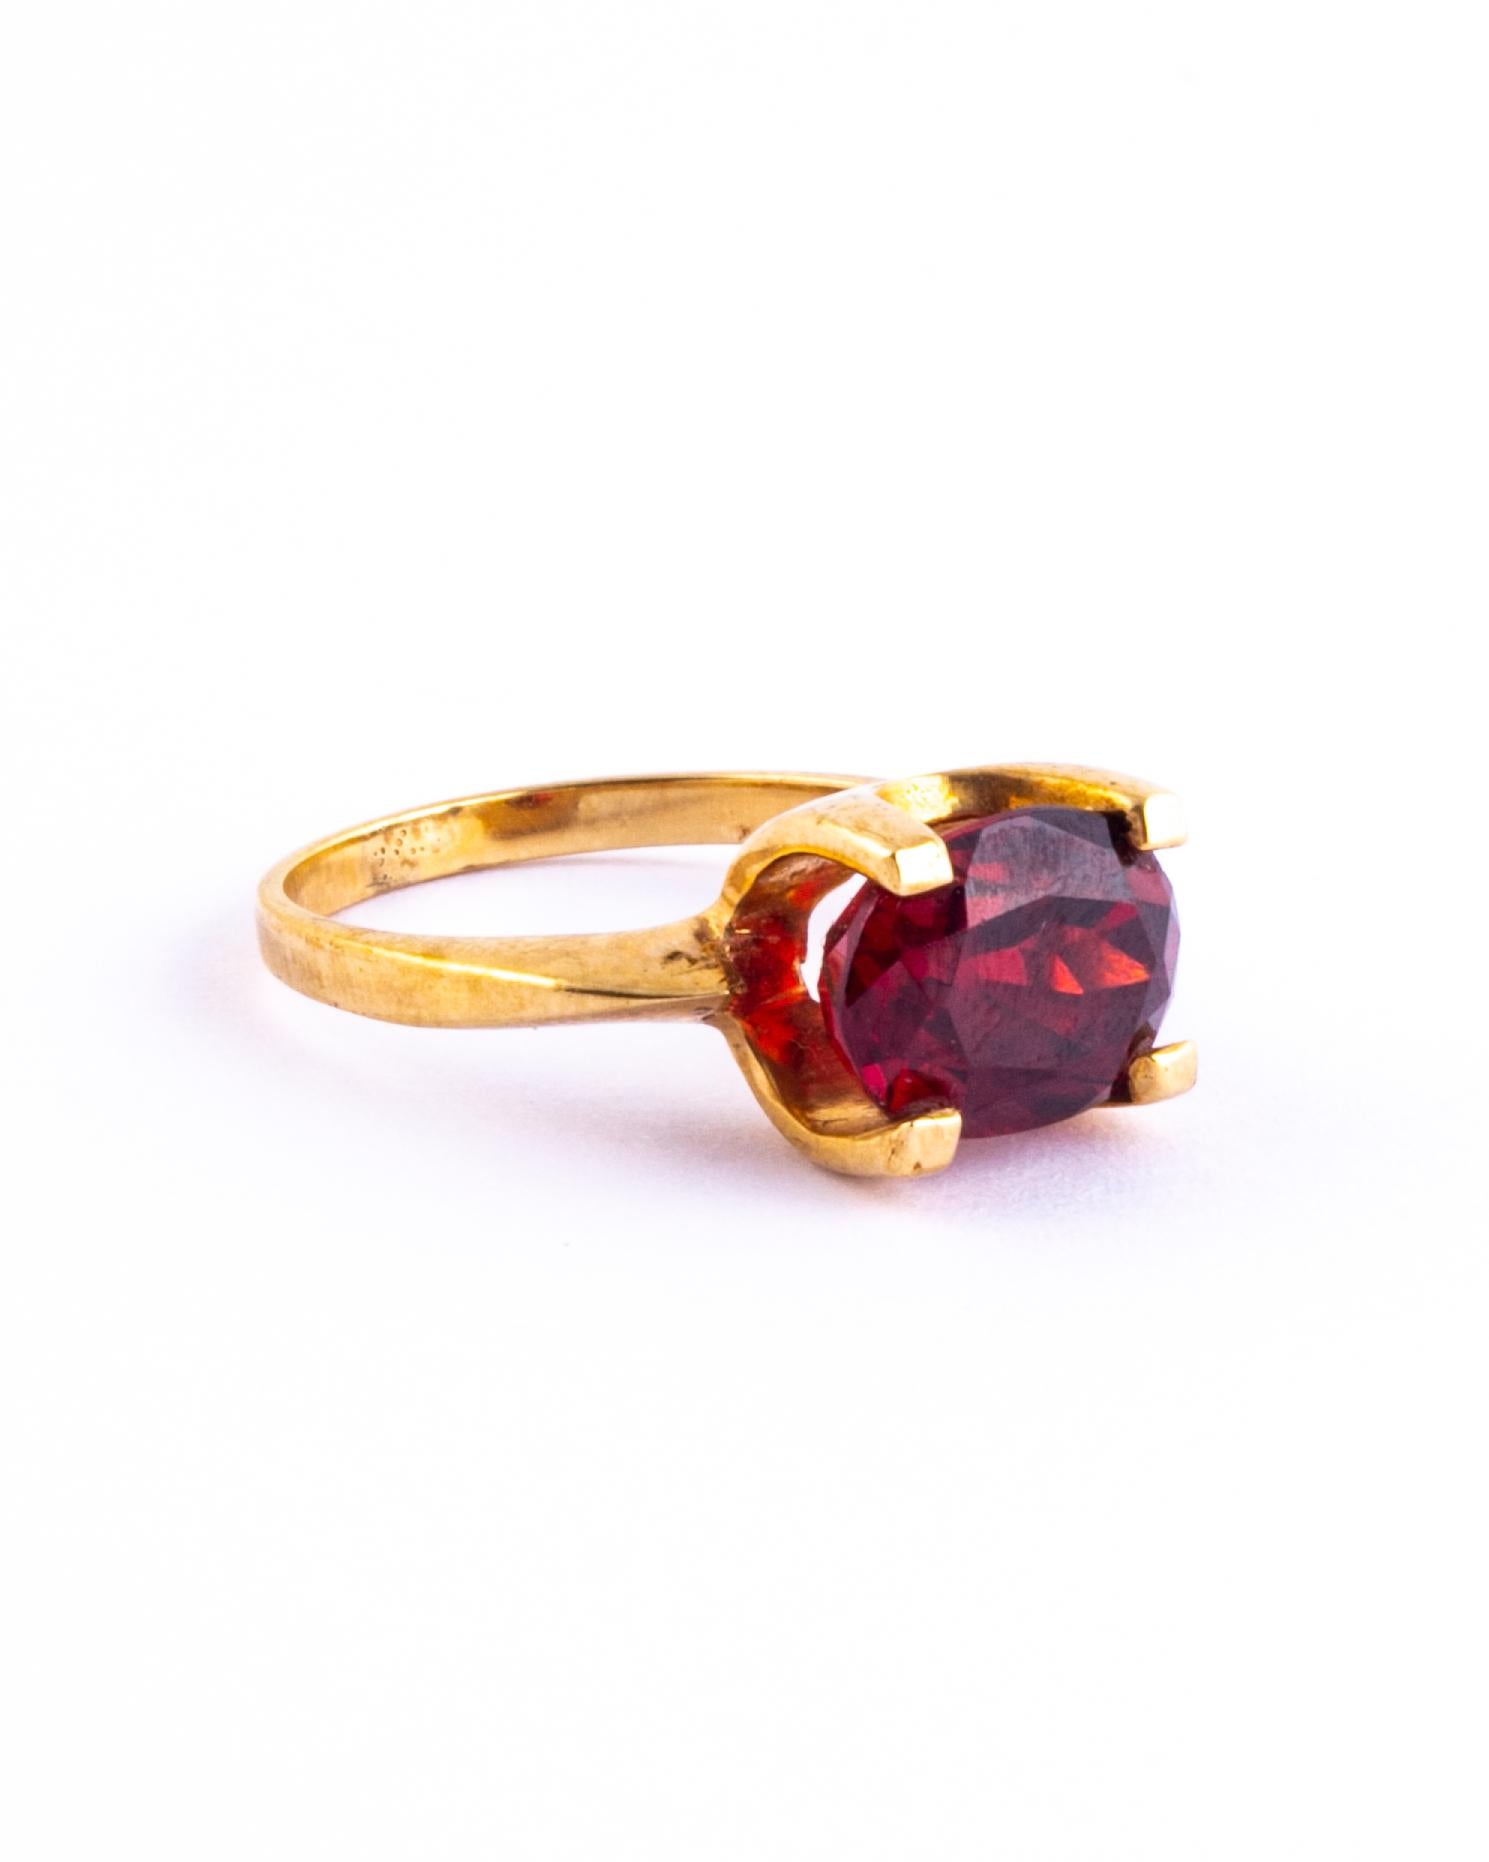 The deep red tourmaline is gorgeous and set simply up high in this 9 carat gold. The stone catches the light beautifully and has sparkles of a brighter red. 

Ring Size: L or 5 3/4
Height Off Finger: 7mm
Stone Dimensions: 10x8mm

Weight: 3.95g